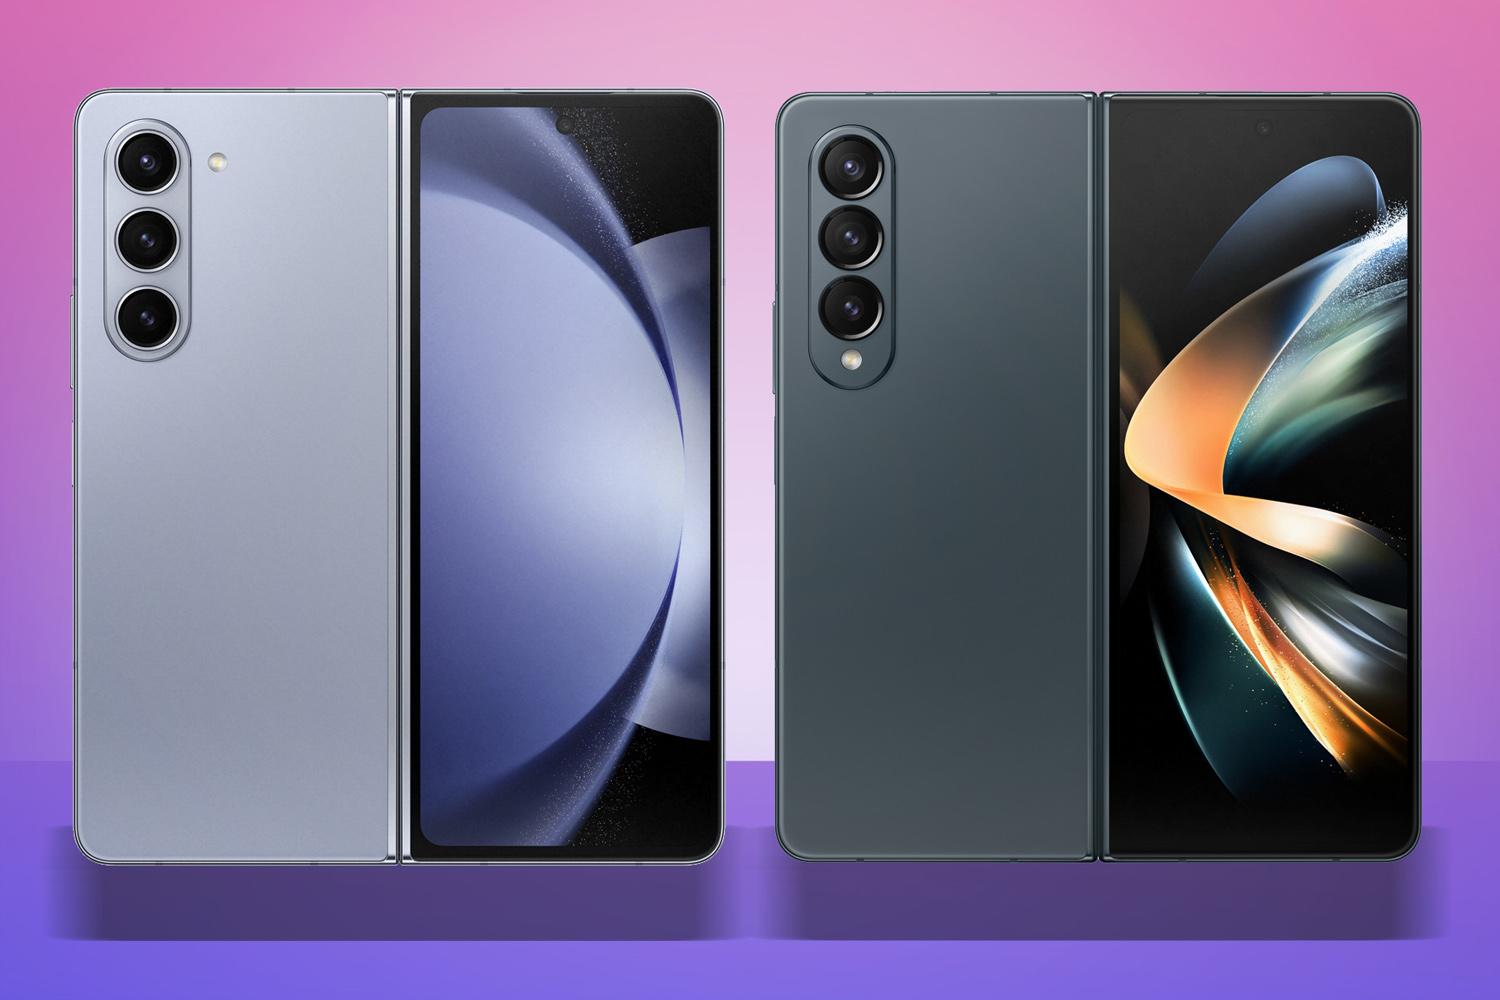 Samsung Galaxy Z Fold 5 vs Fold 4: what's the difference?